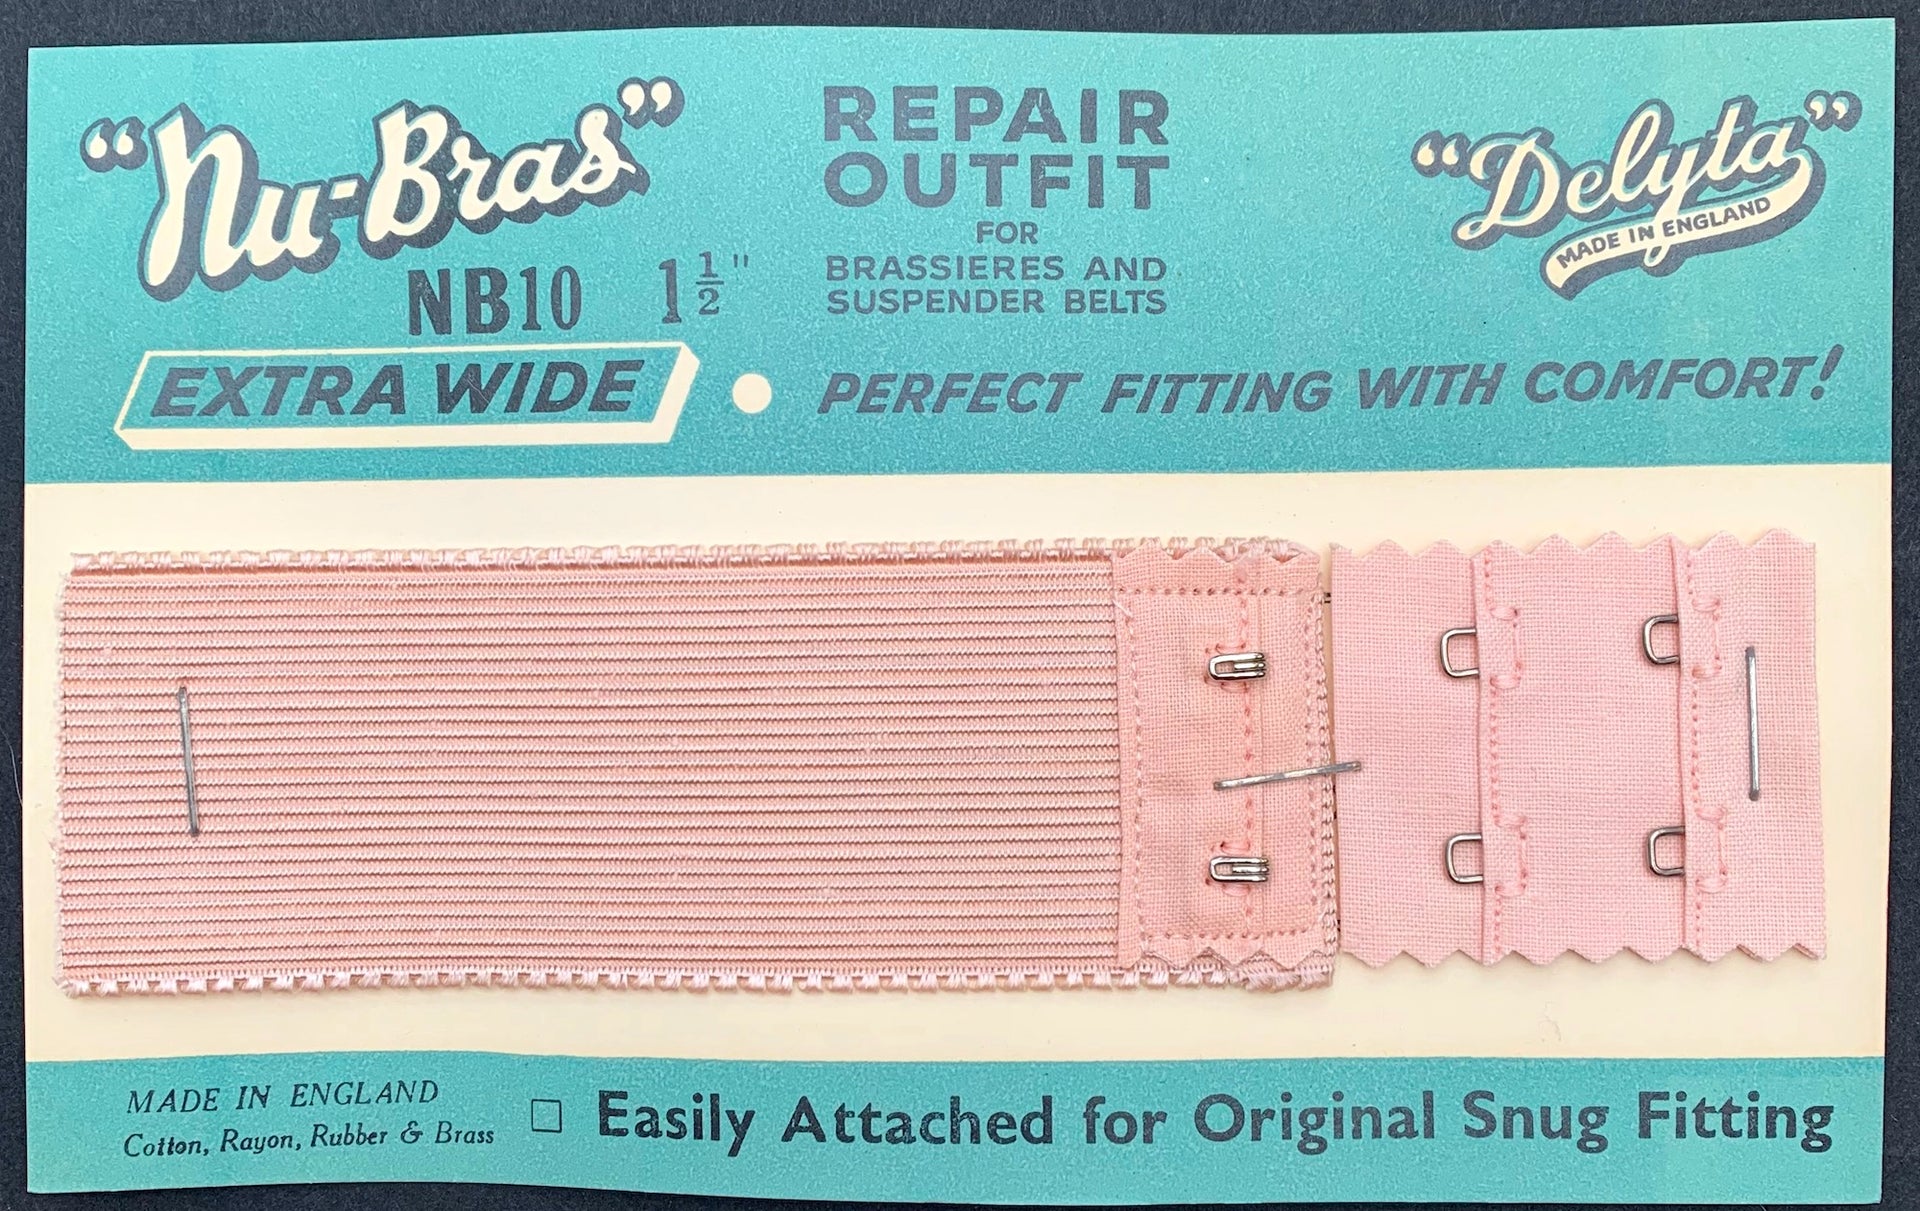 DOUBLE THE LIFE OF YOUR BRA -5 long 1.5 wide 1940s Brassiere Repair Kit